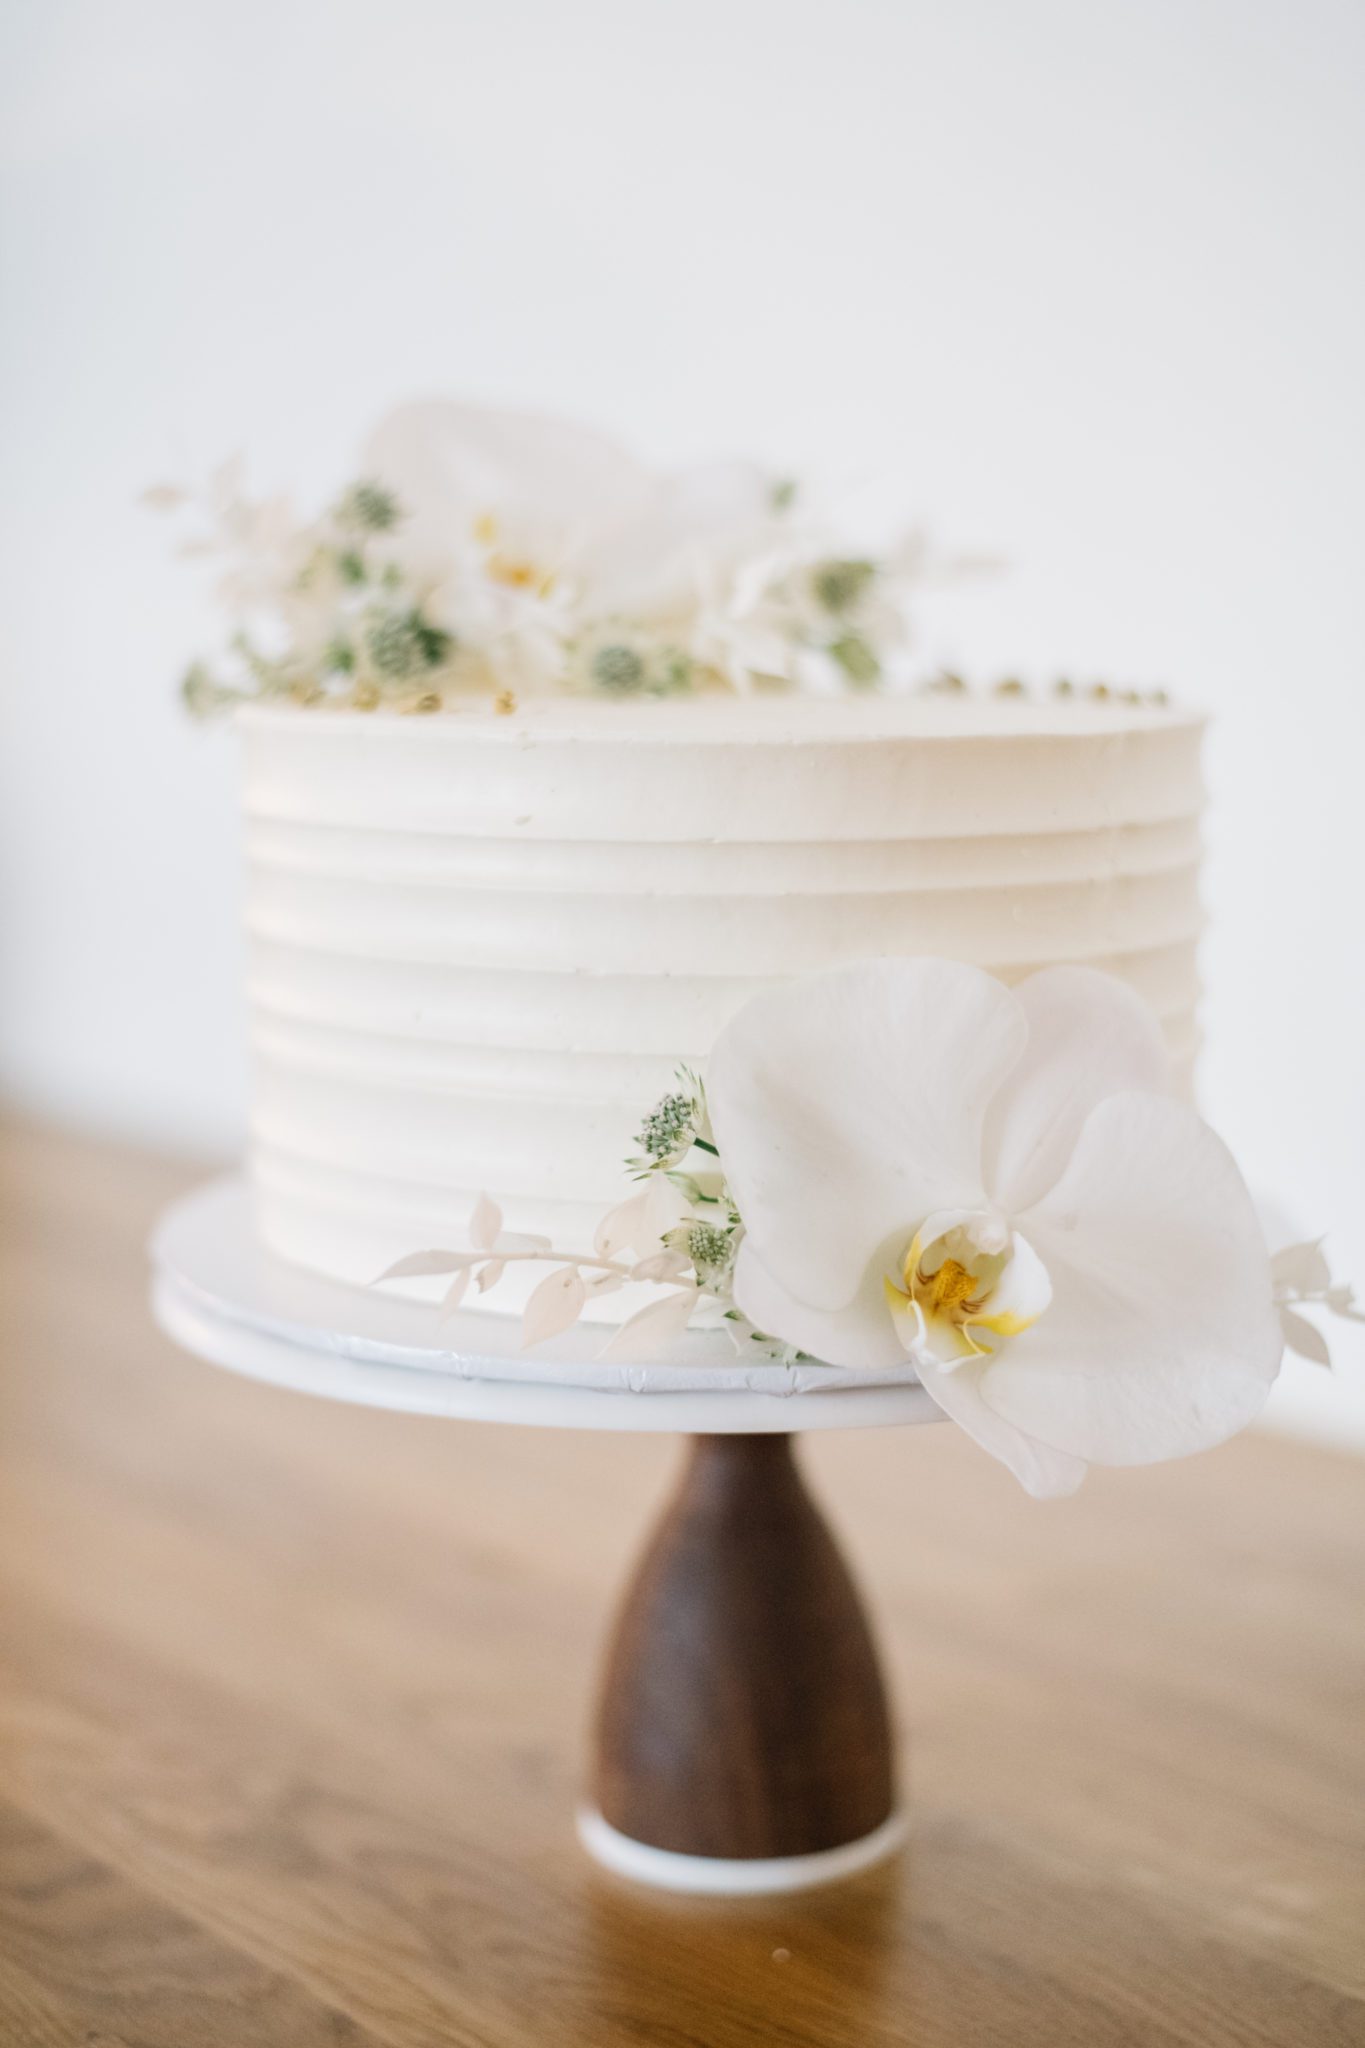 One-tier wedding cake perfect for an elopement or small wedding